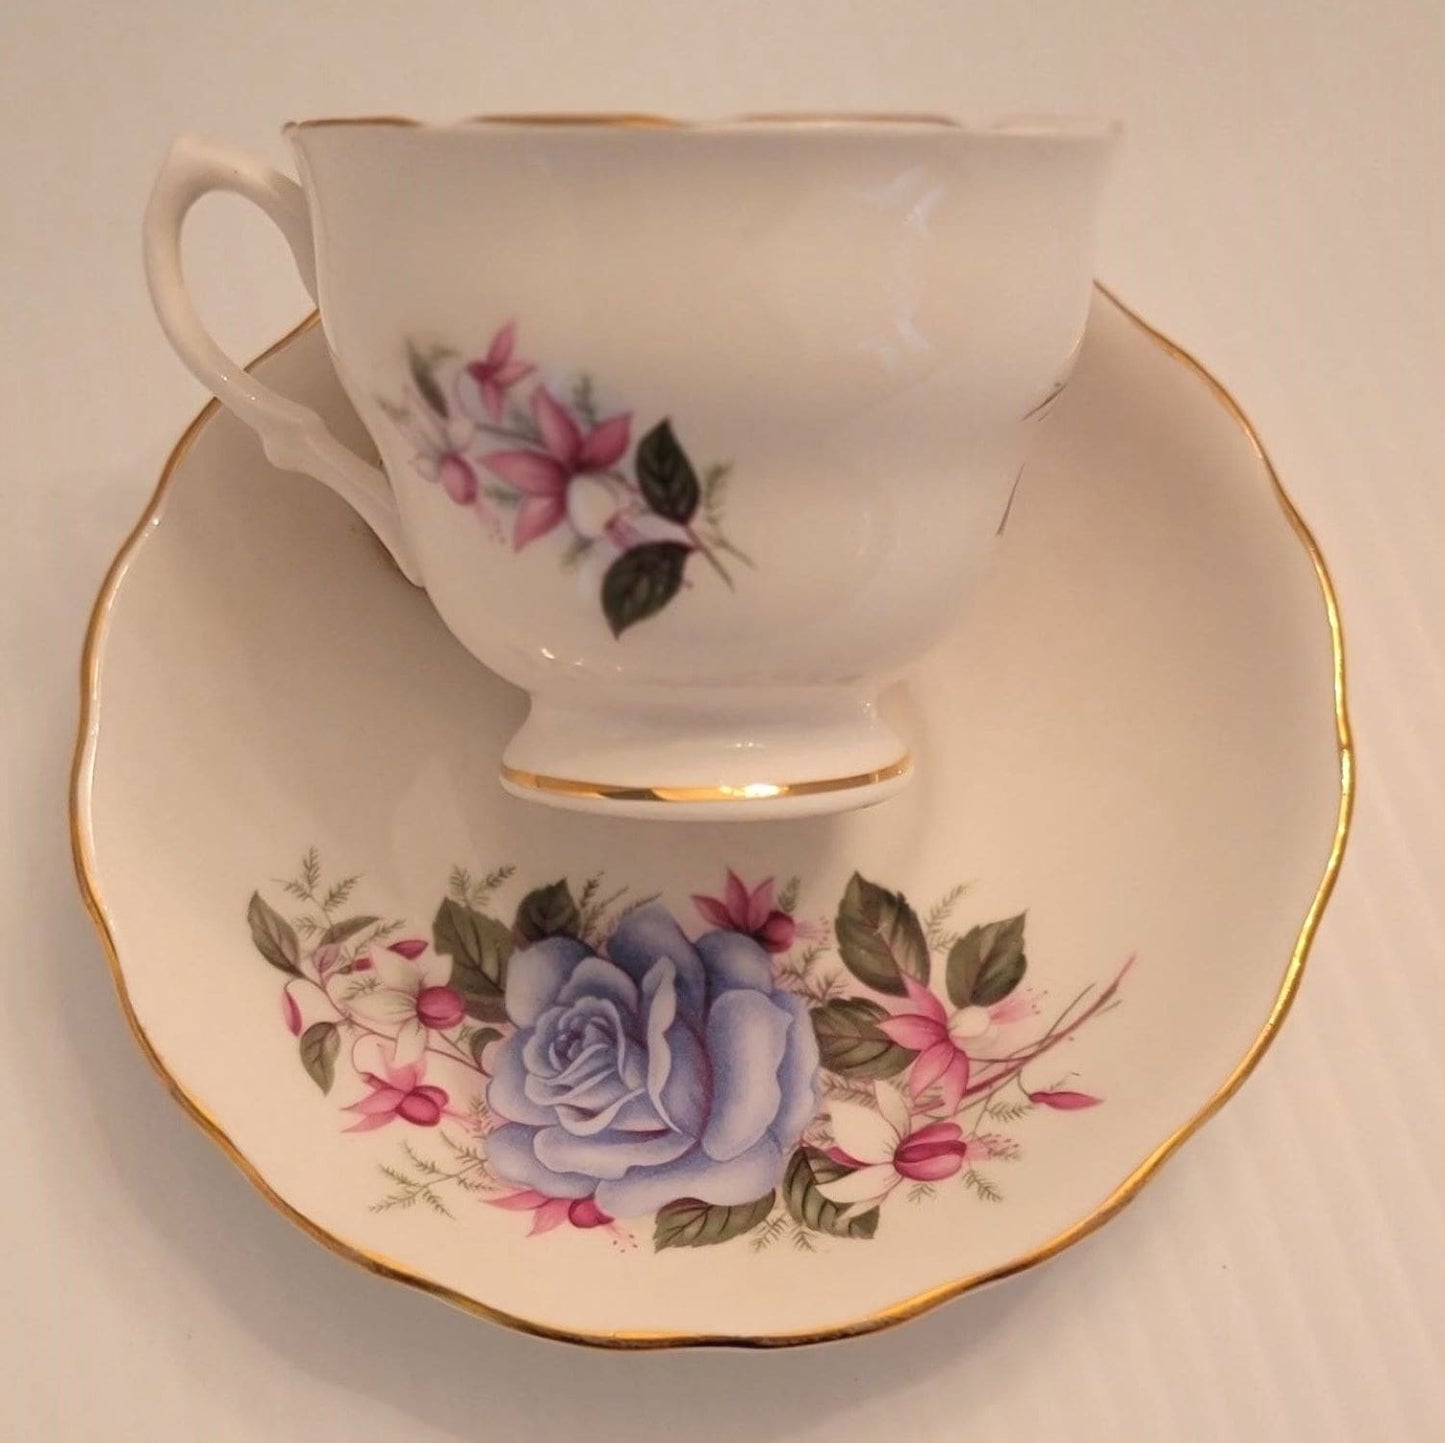 A tea cup and saucer featuring a delicate blue rose design.